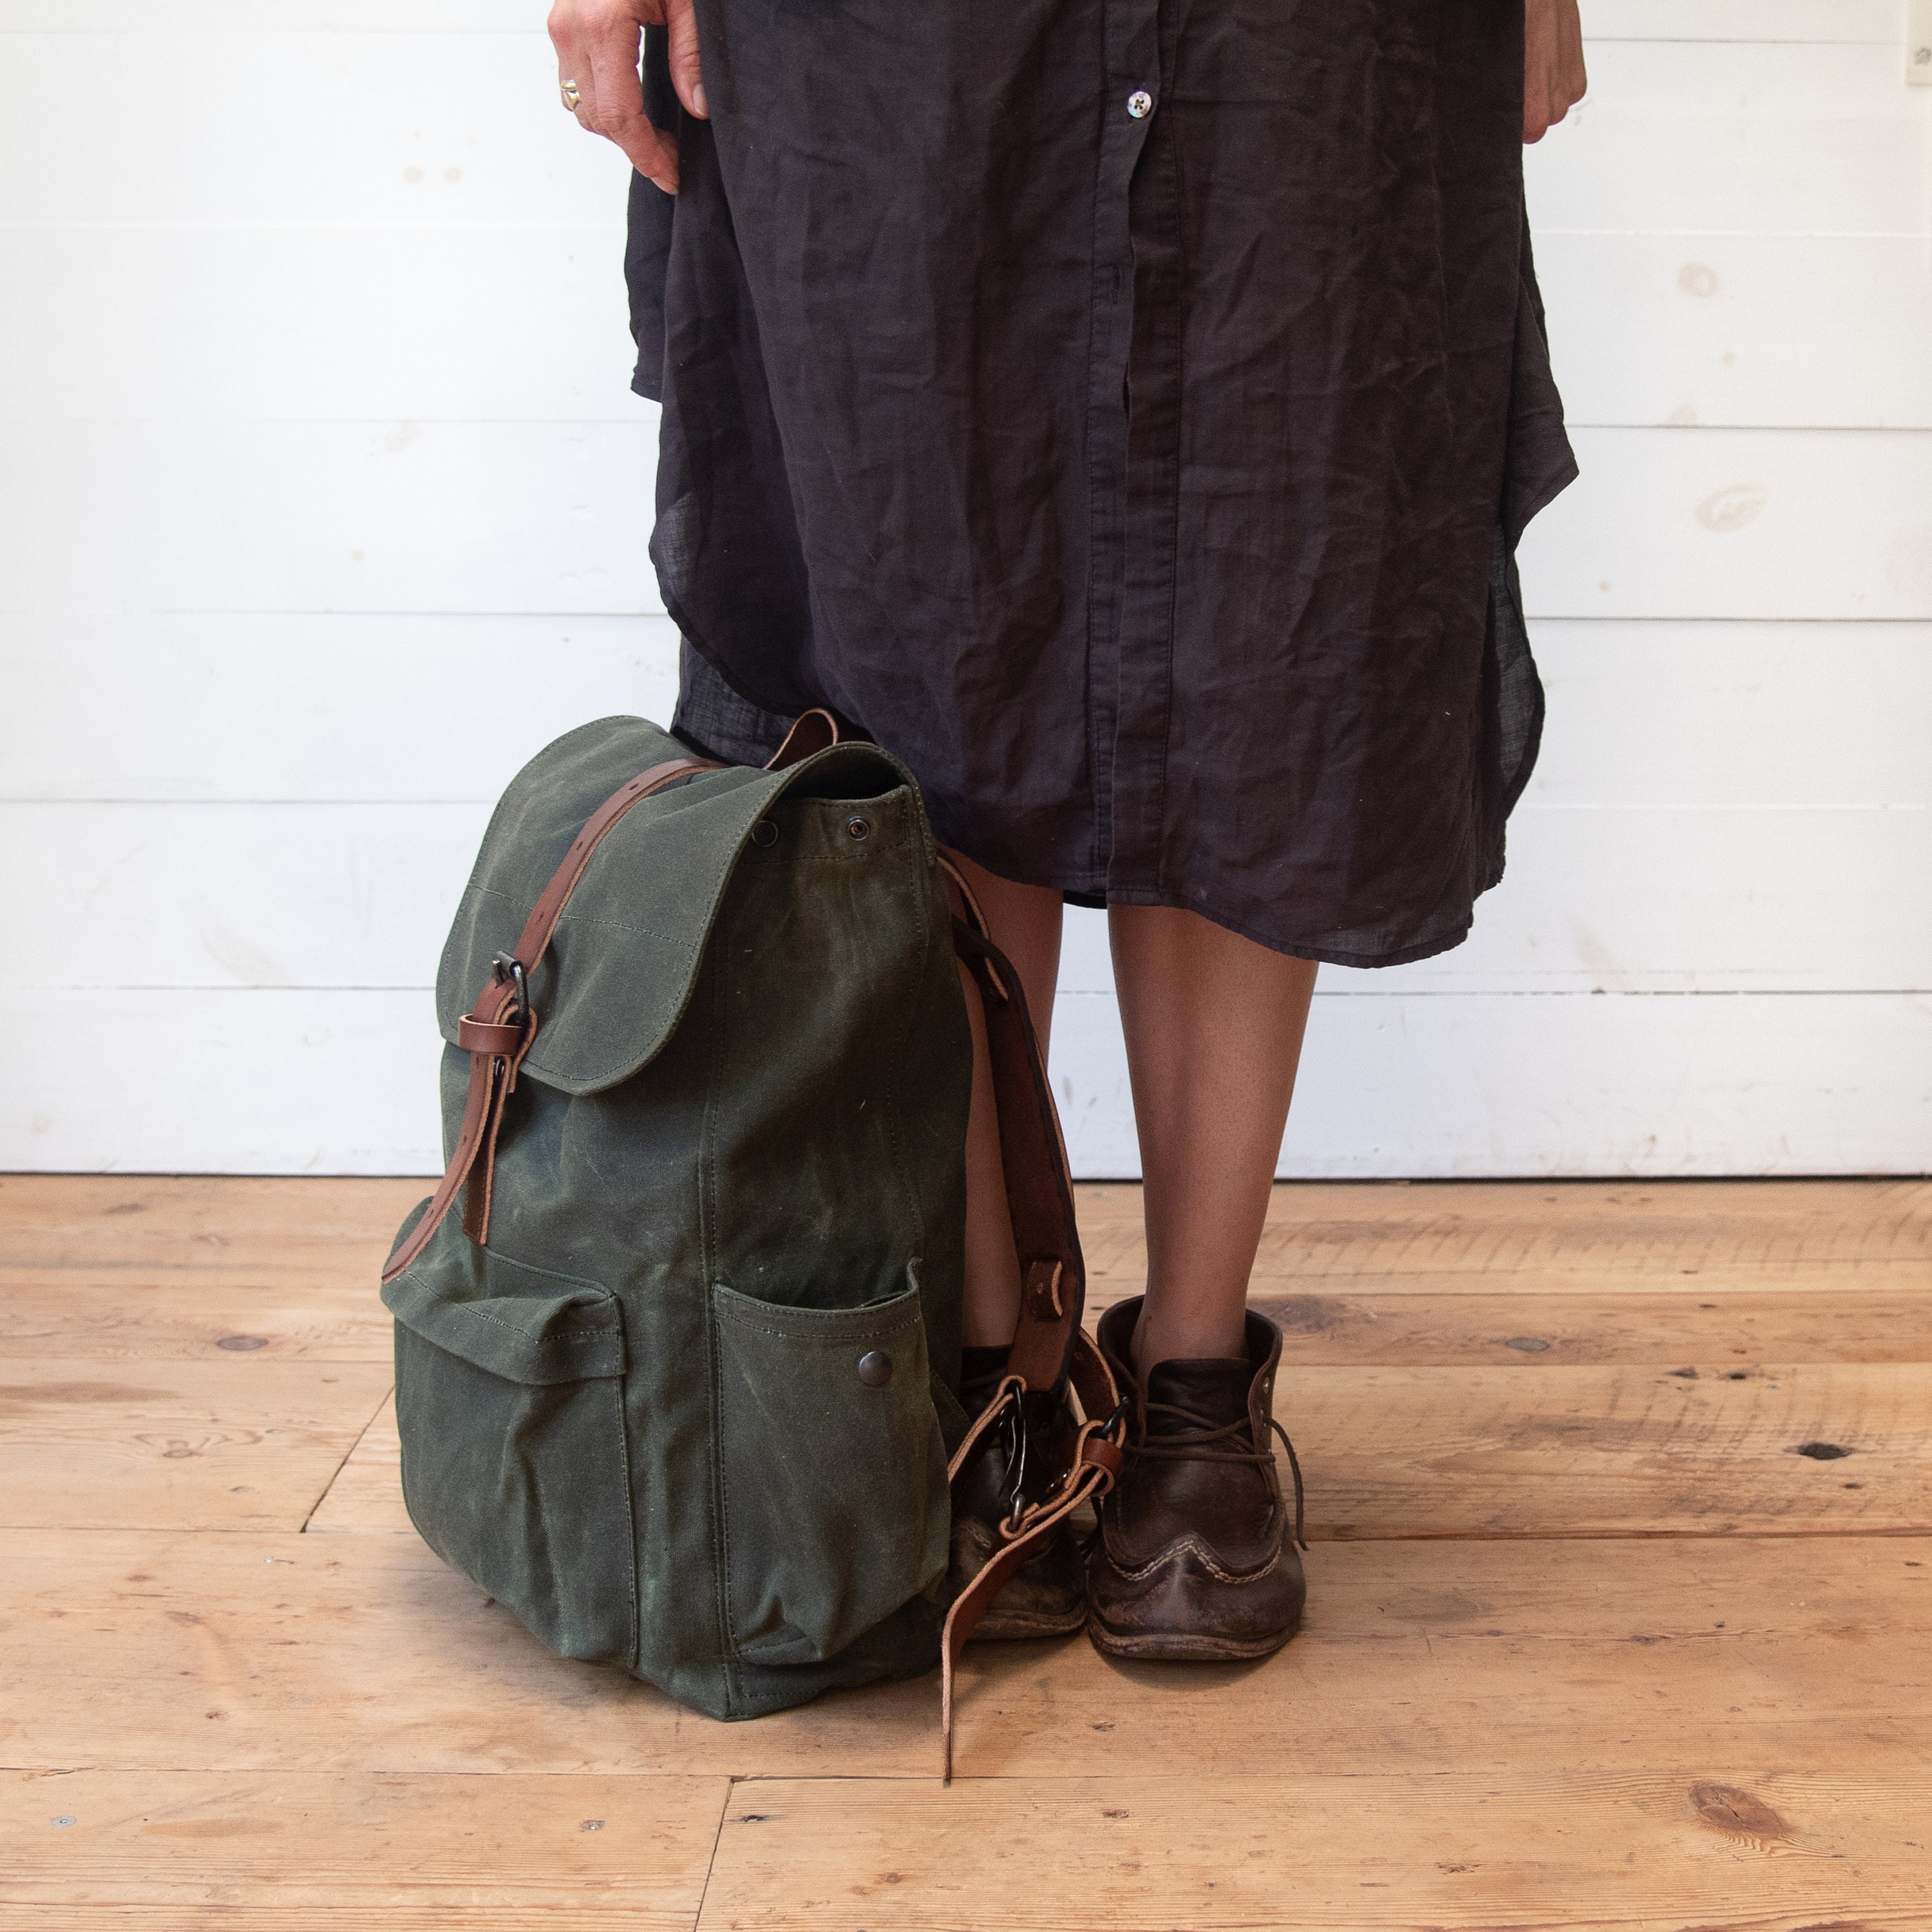 Waxed Canvas Backpack with Pockets LAST CHANCE Rucksack by - Etsy 日本